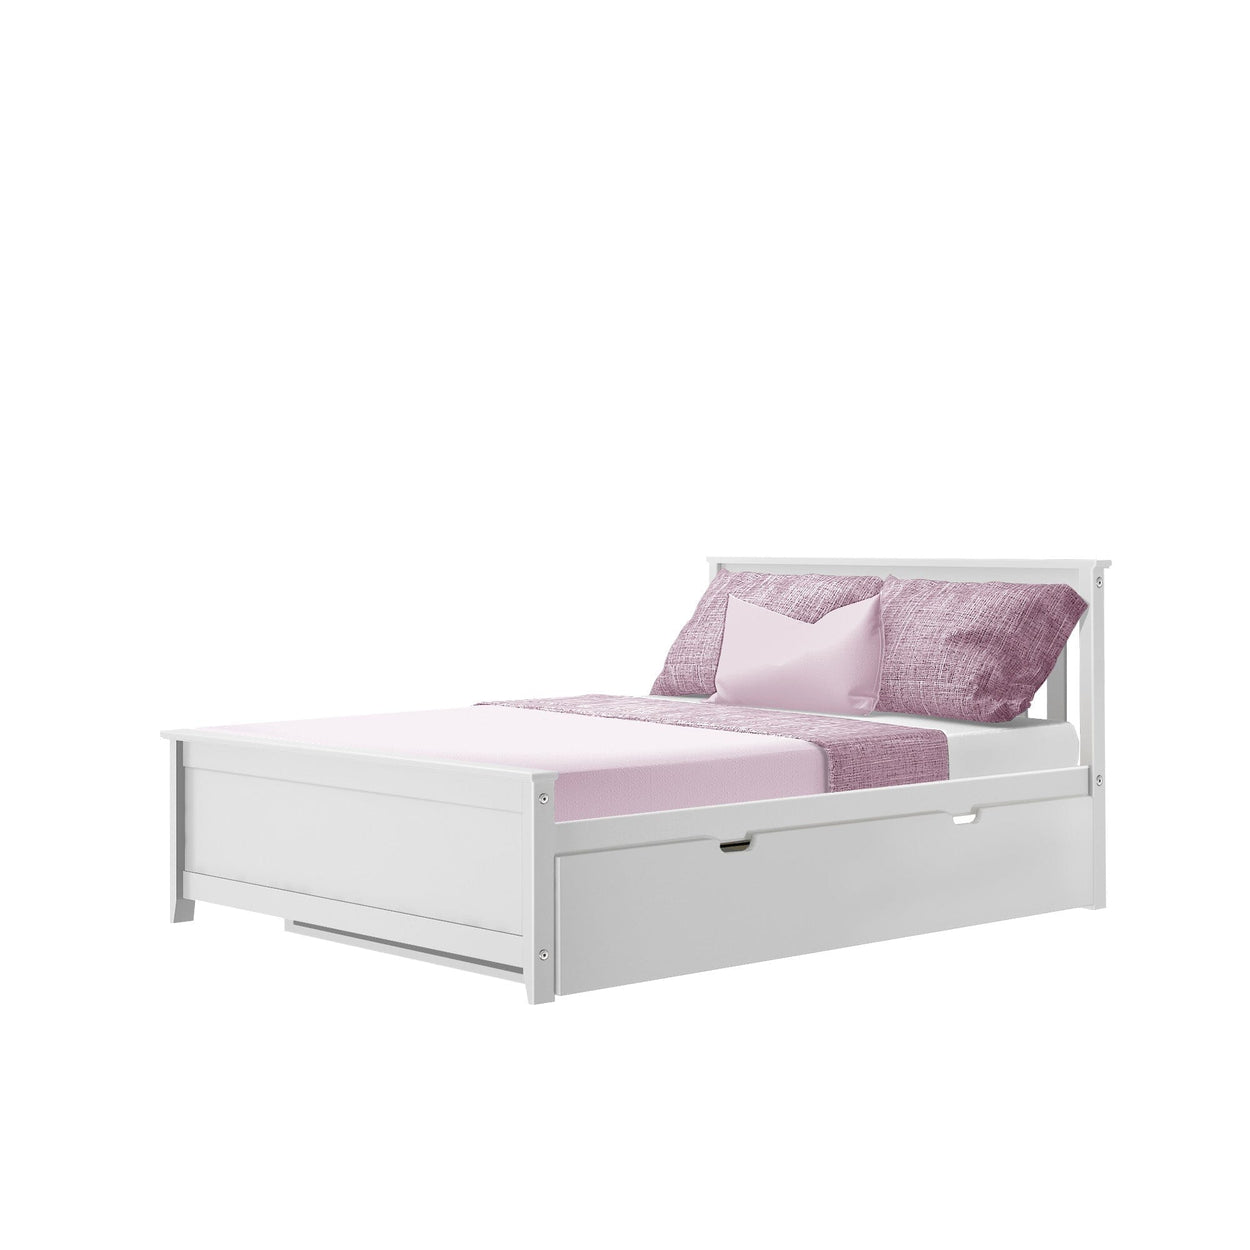 186211-002 : Kids Beds Classic Full-Size Bed with Trundle, White